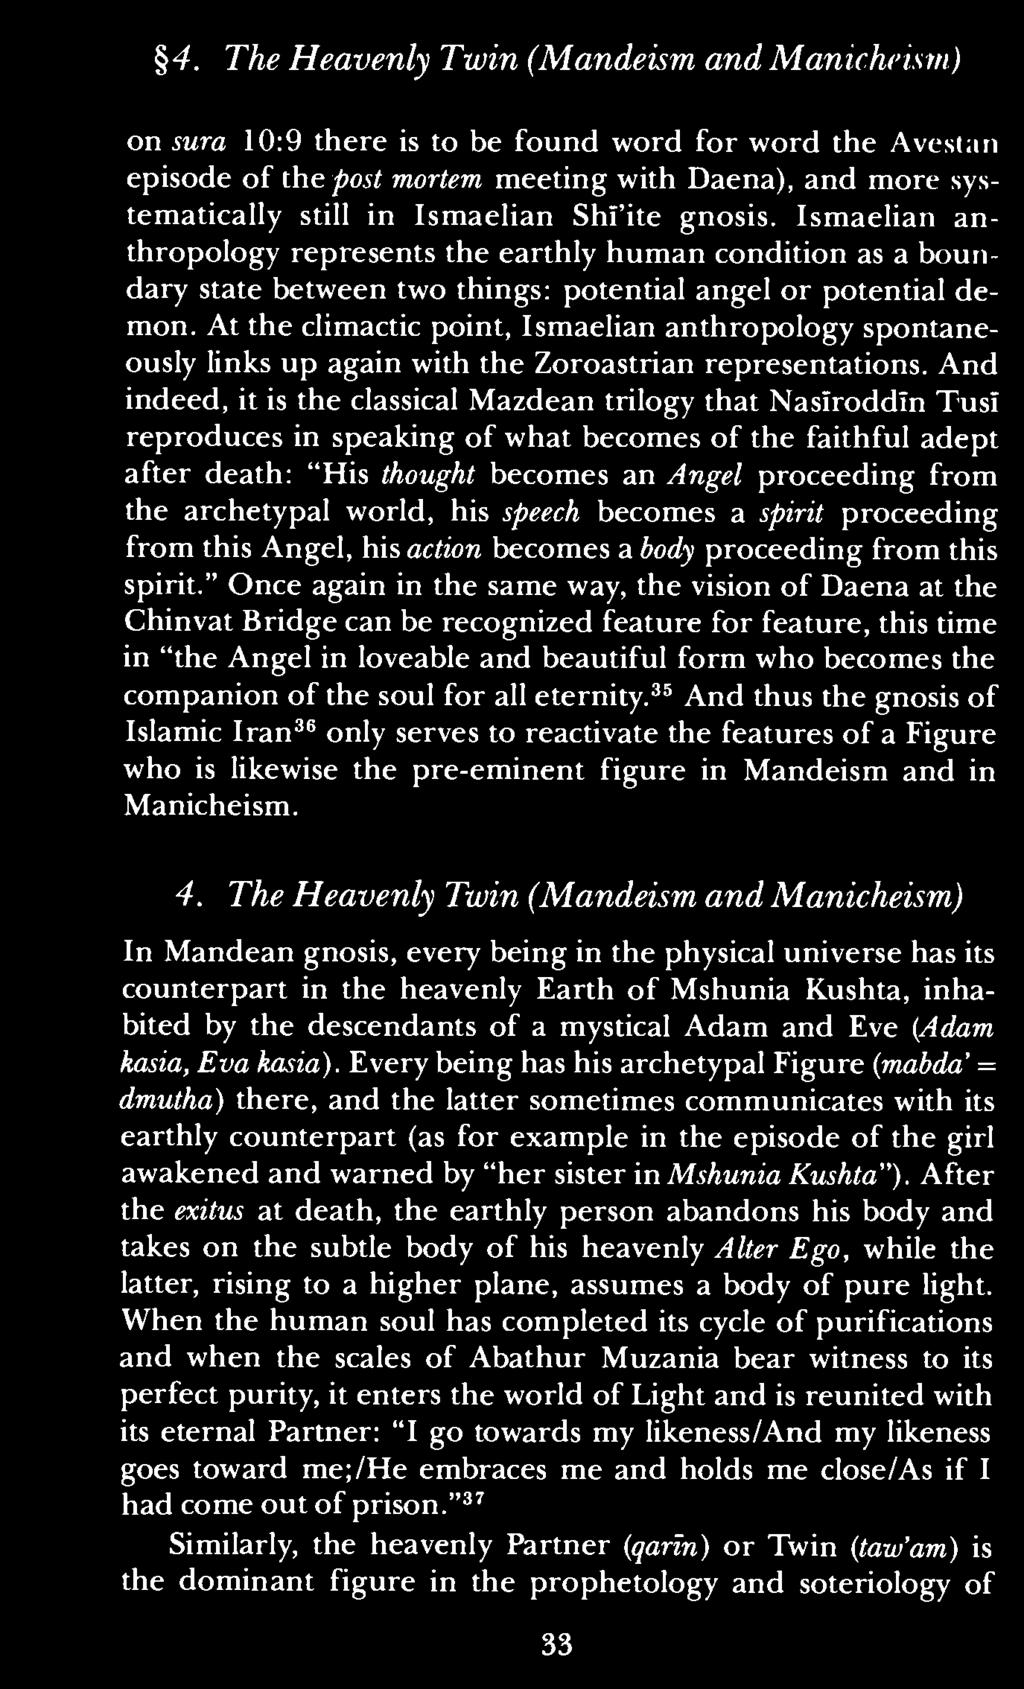 4. The Heavenly Twin (Mandeism and Manicheism) on sura 10:9 there is to be found word for word the Avestan episode of the post mortem meeting with Daena), and more systematically still in Ismaelian